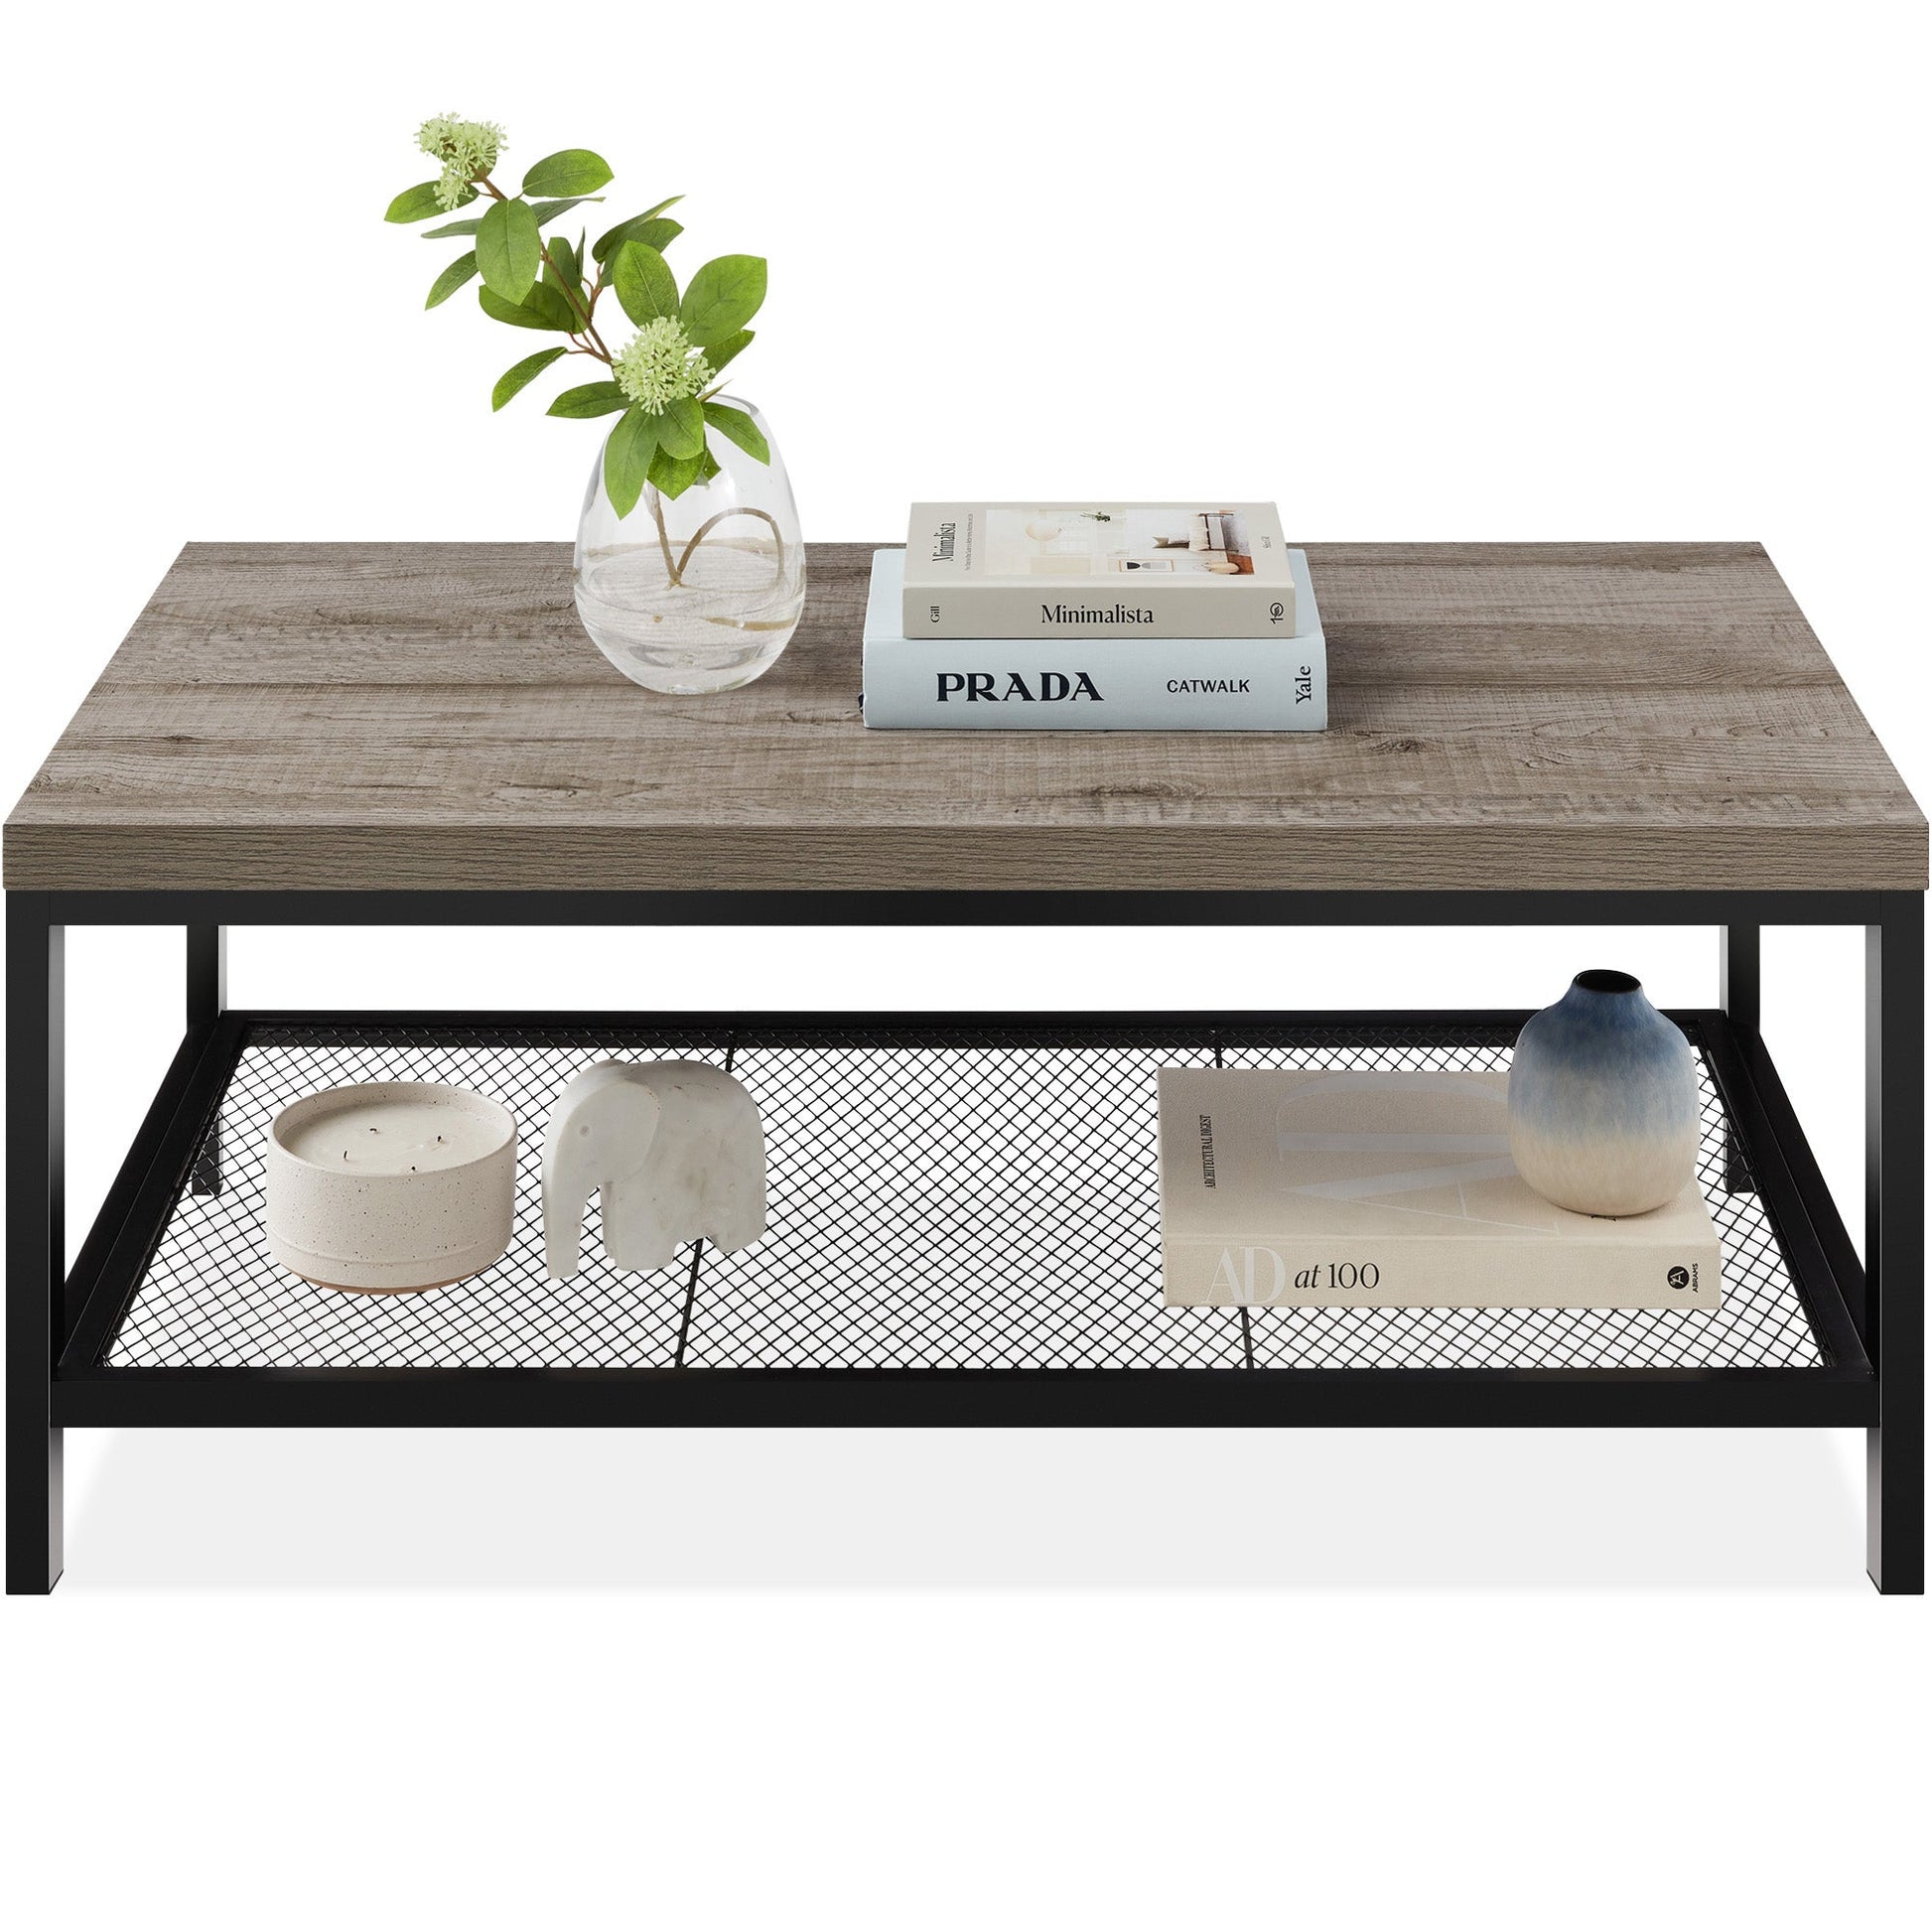 2-Tier Modern Coffee Table Industrial Rectangular Accent w/ Shelf - 44in